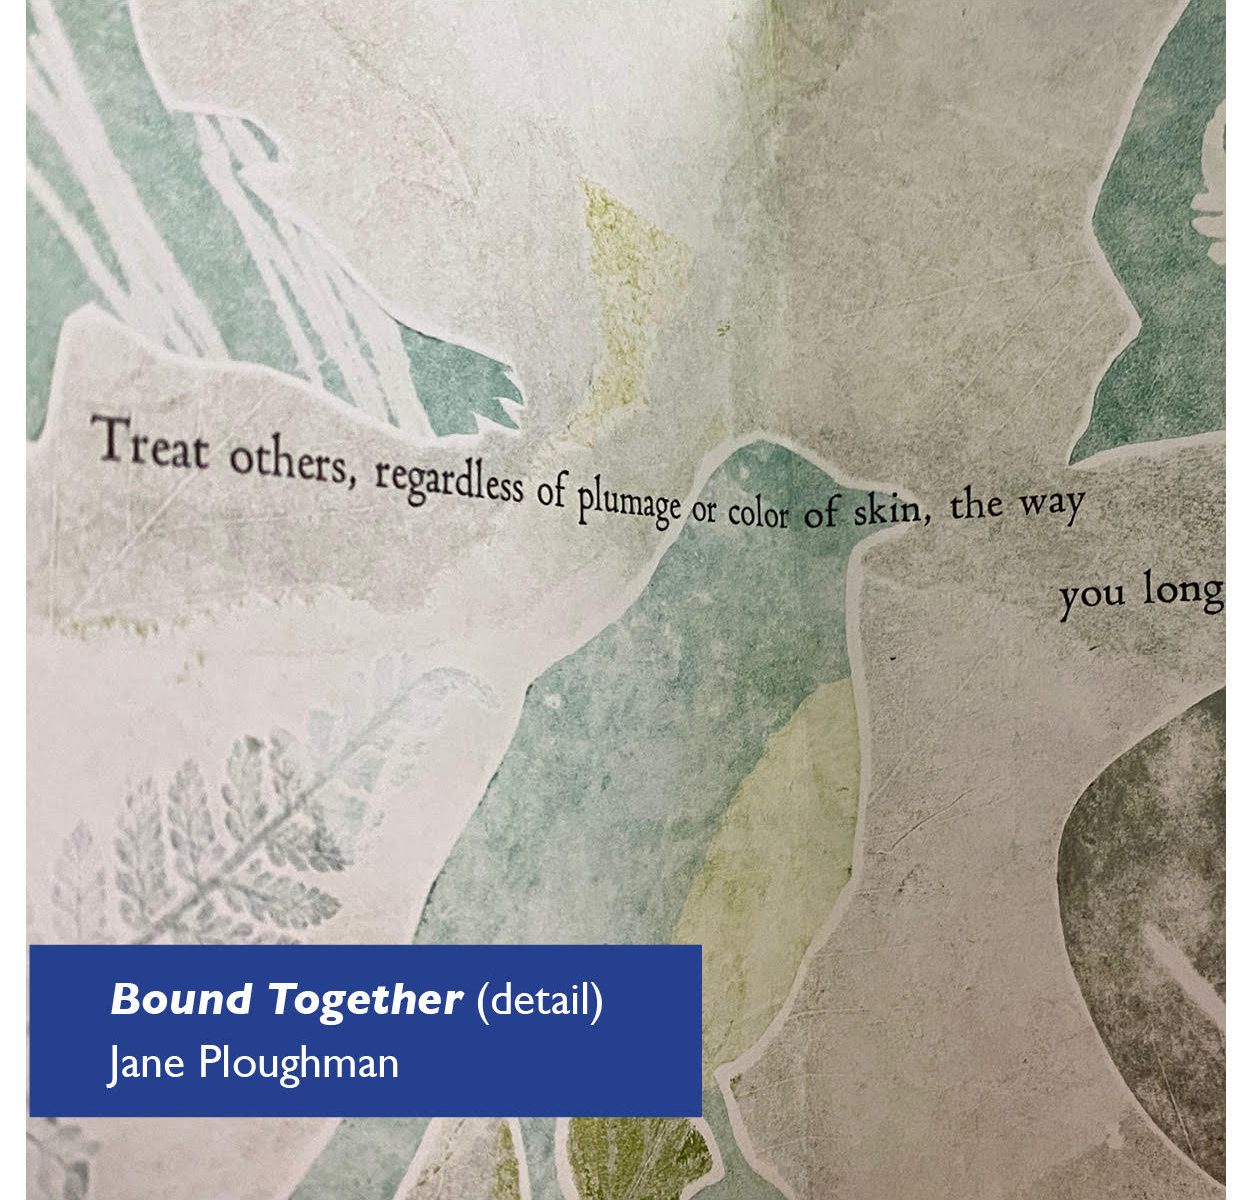 Three partial birds in pale green on a gray and cream background, with the words "Treat others, regardless of plumage or color of skin, the way you long" Detail image of an letterpress/monoprint artist book, © by Jane Ploughman and shown with permission.